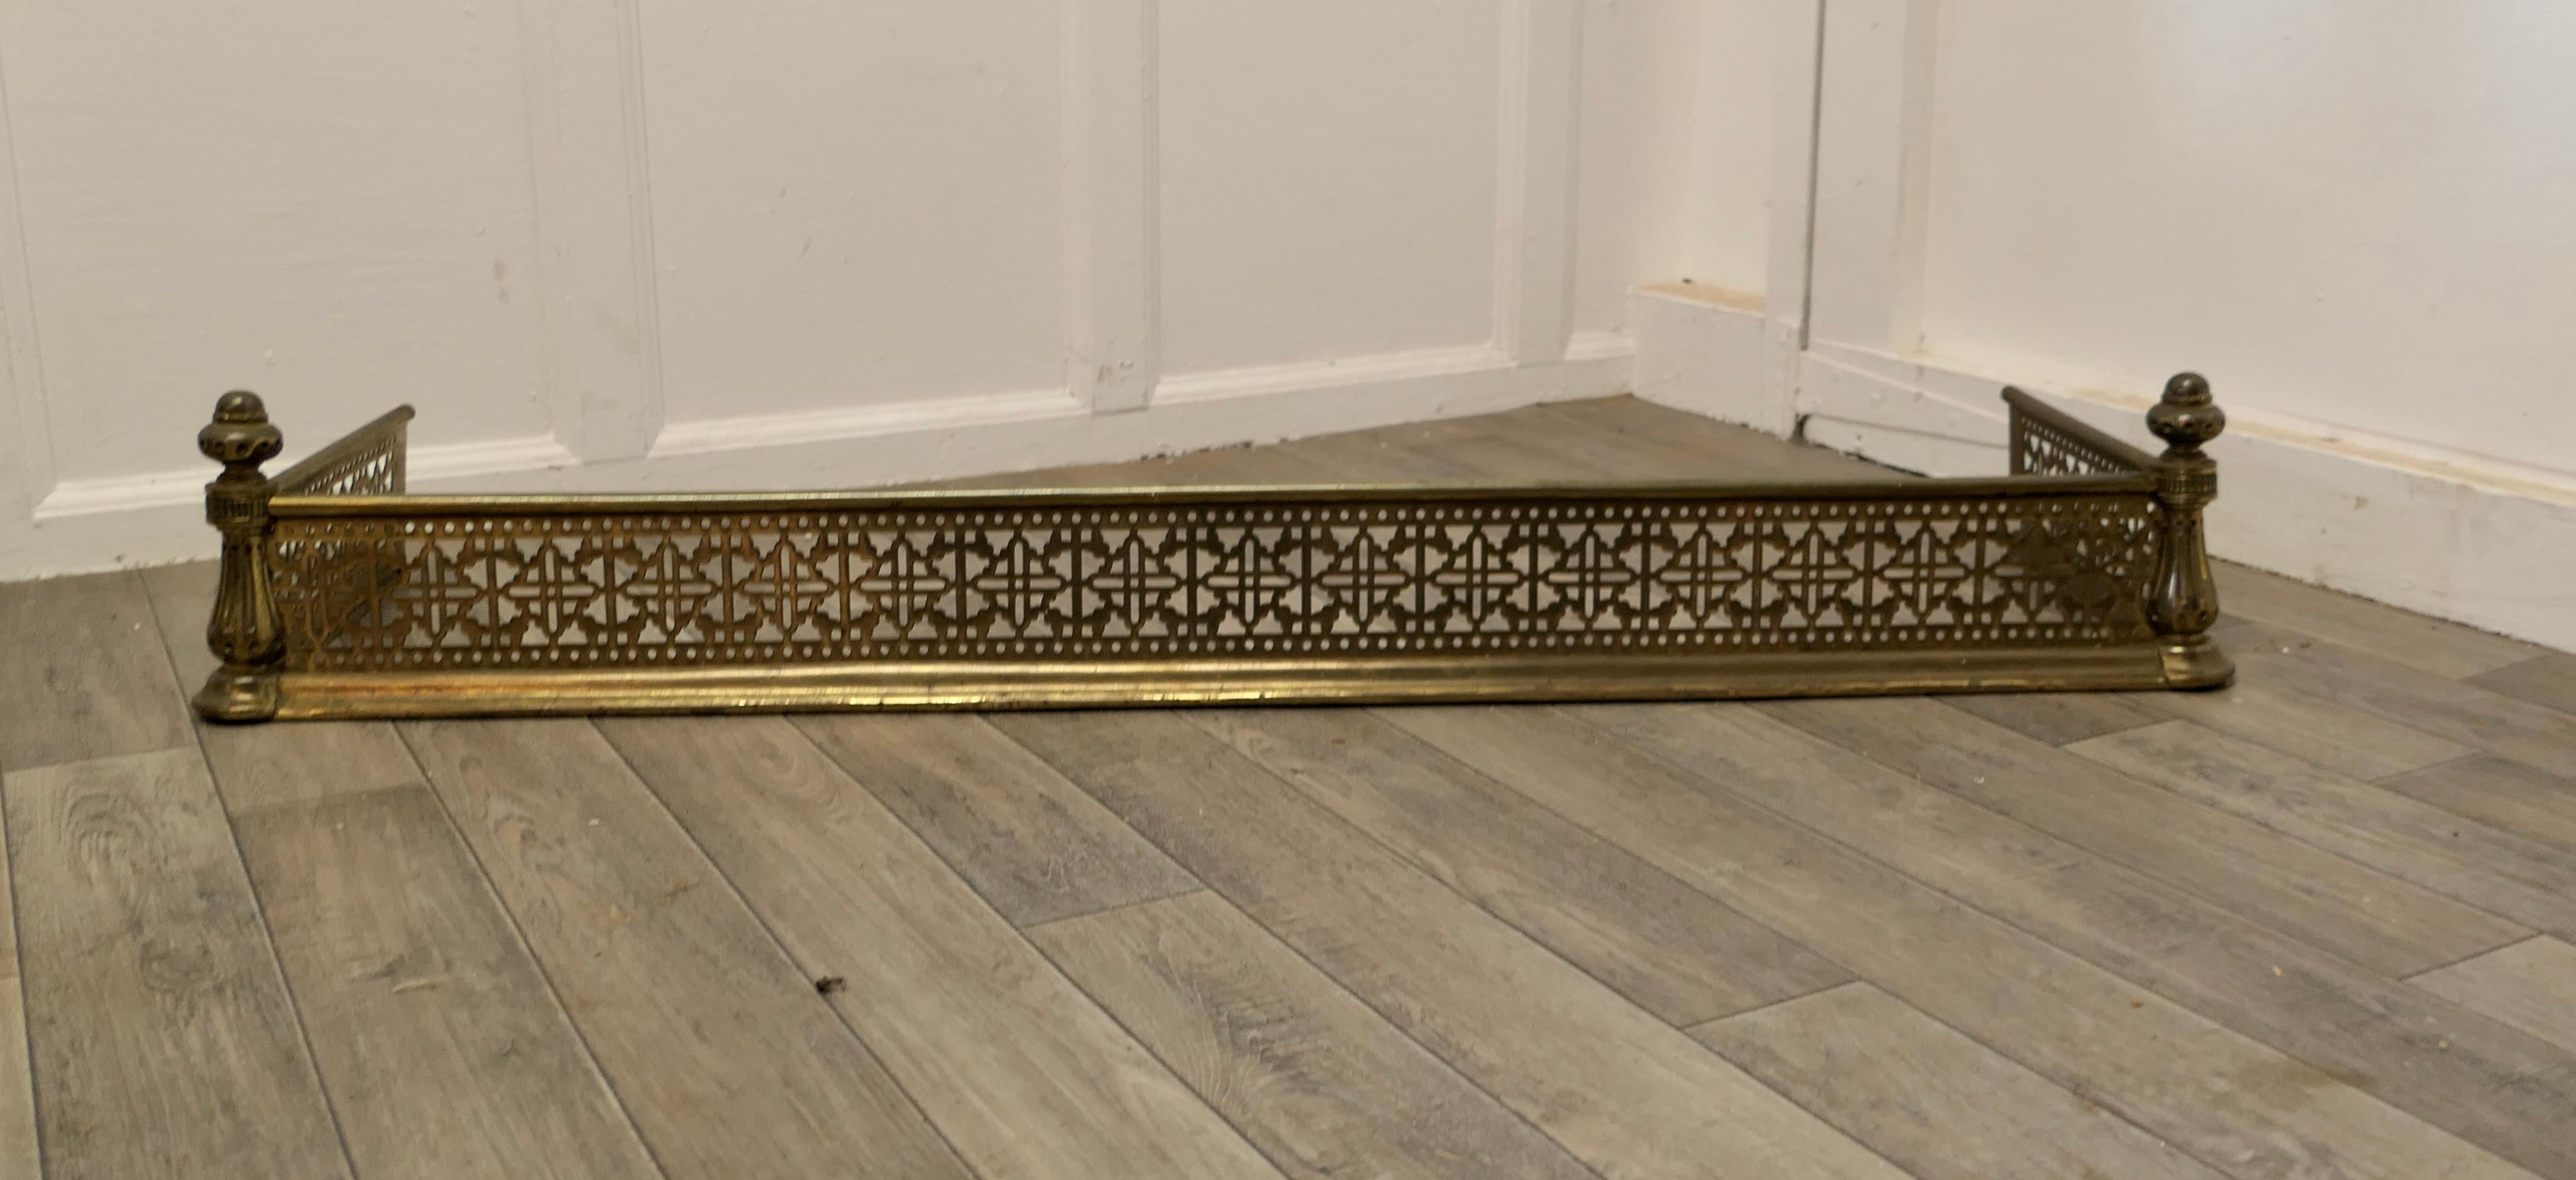 Heavy Victorian arts and crafts pierced brass fender 

This is a very superior quality Victorian Pierced Brass Fender it has a lattice piercing along the front and sides 
The Fender is in Very Good Condition, it is 8” high, and 47” long and 14”